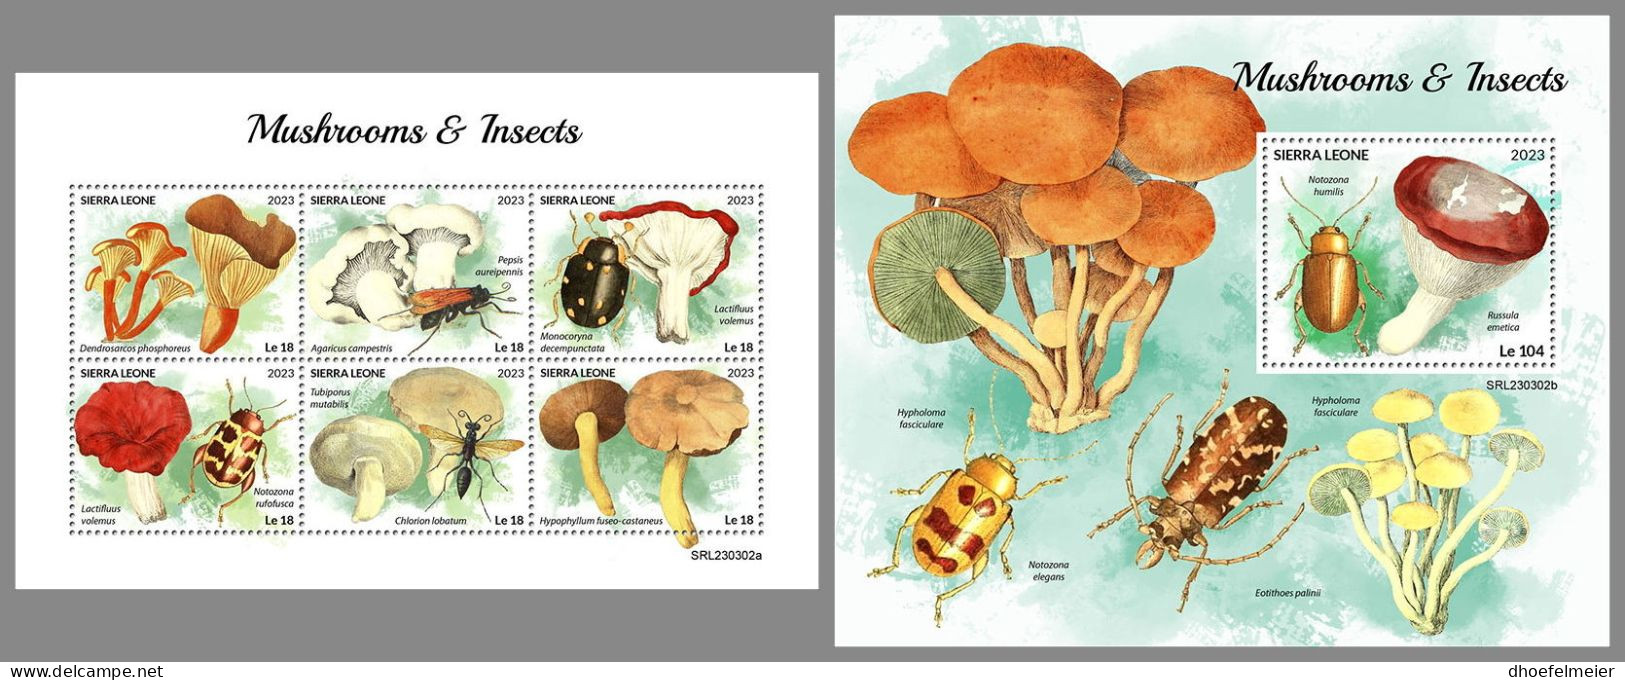 SIERRA LEONE 2023 MNH Mushrooms & Insects Pilze & Insekten M/S+S/S – OFFICIAL ISSUE – DHQ2418 - Pilze